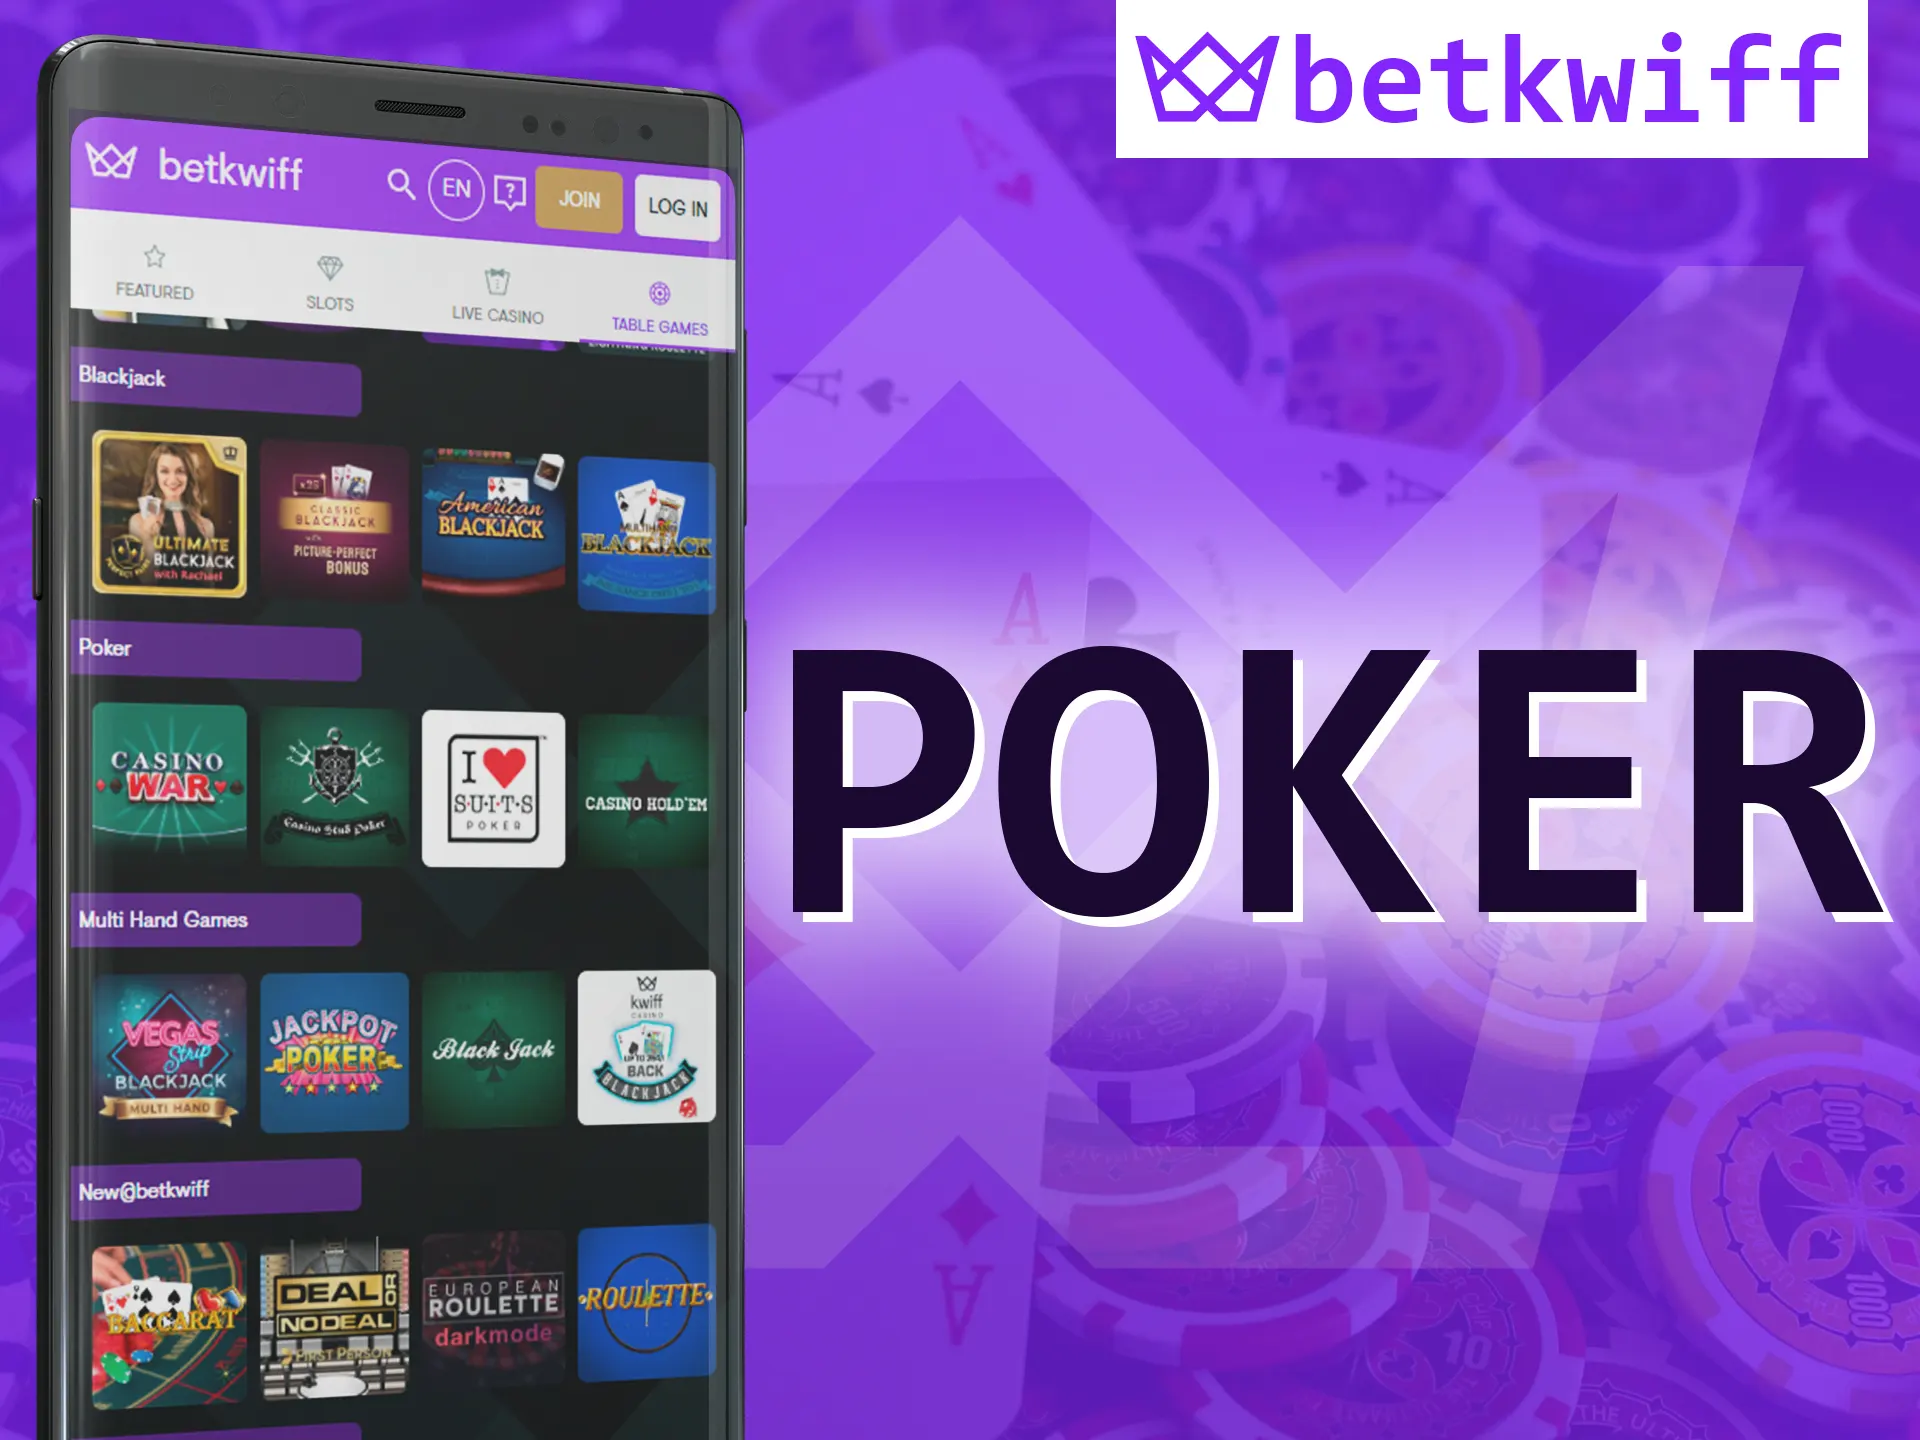 Play poker on the Betkwiff app.